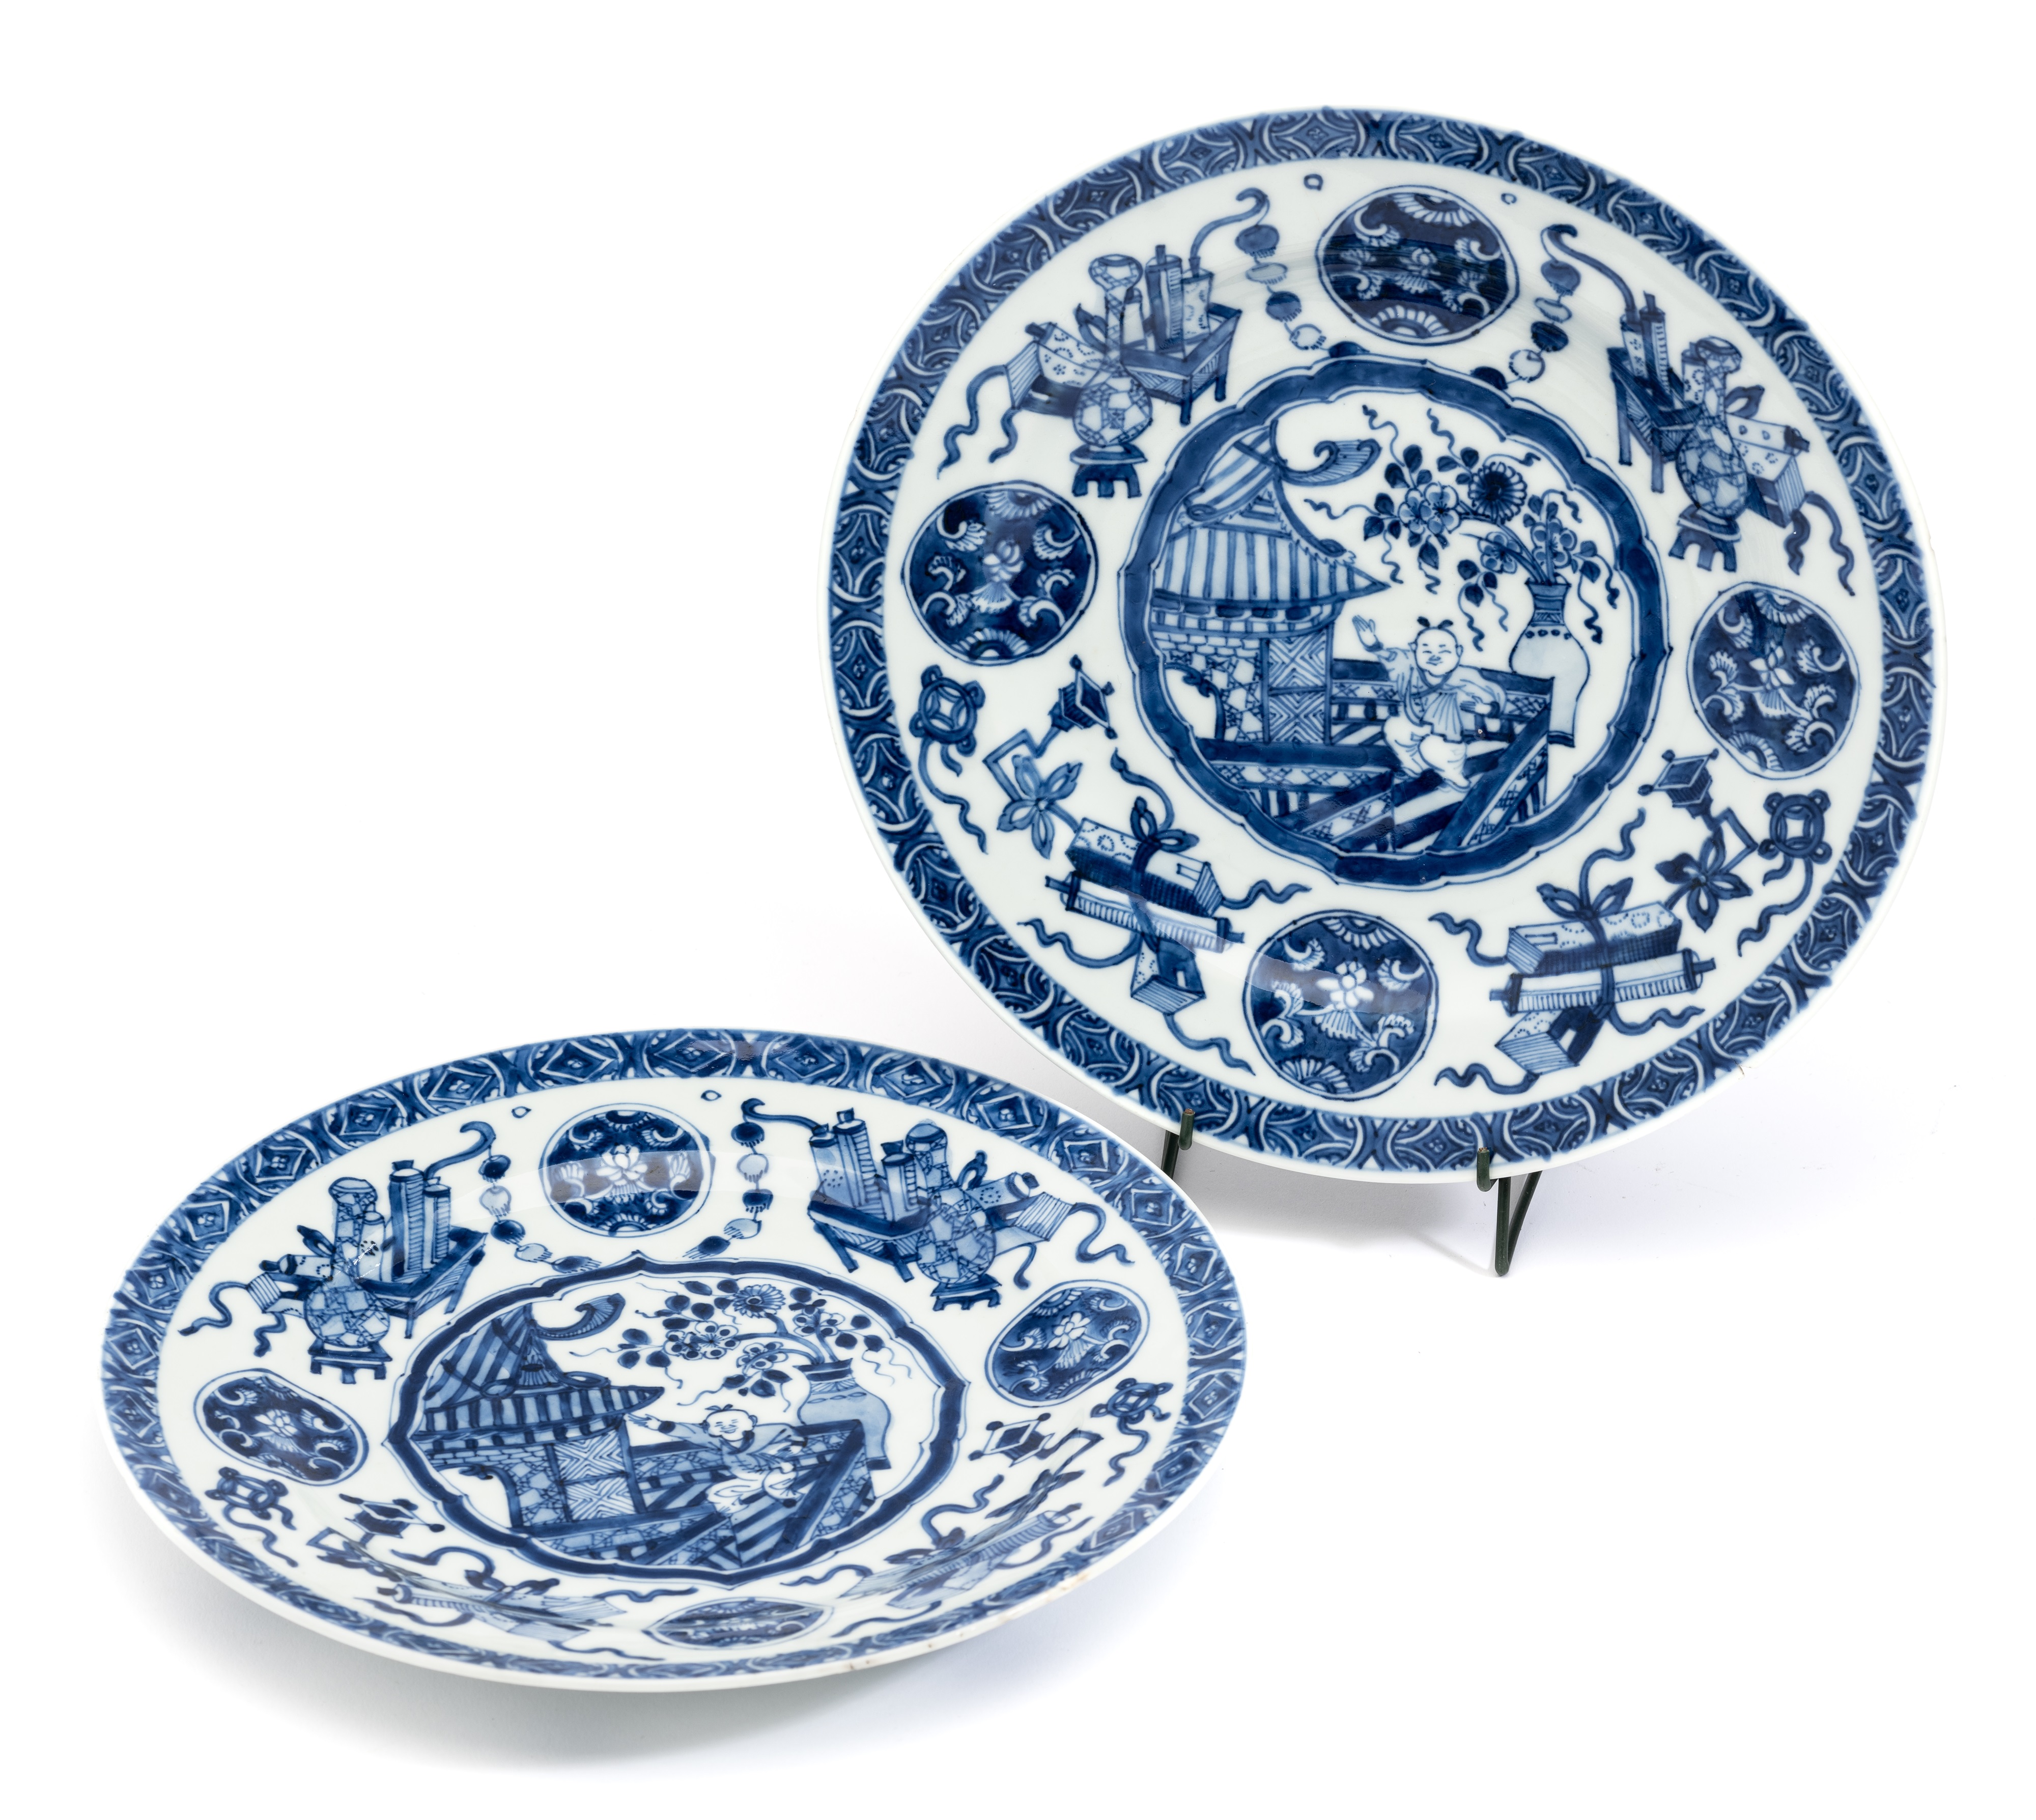 A PAIR OF CHINESE BLUE AND WHITE PLATES, KANGXI PERIOD (1662-1722)